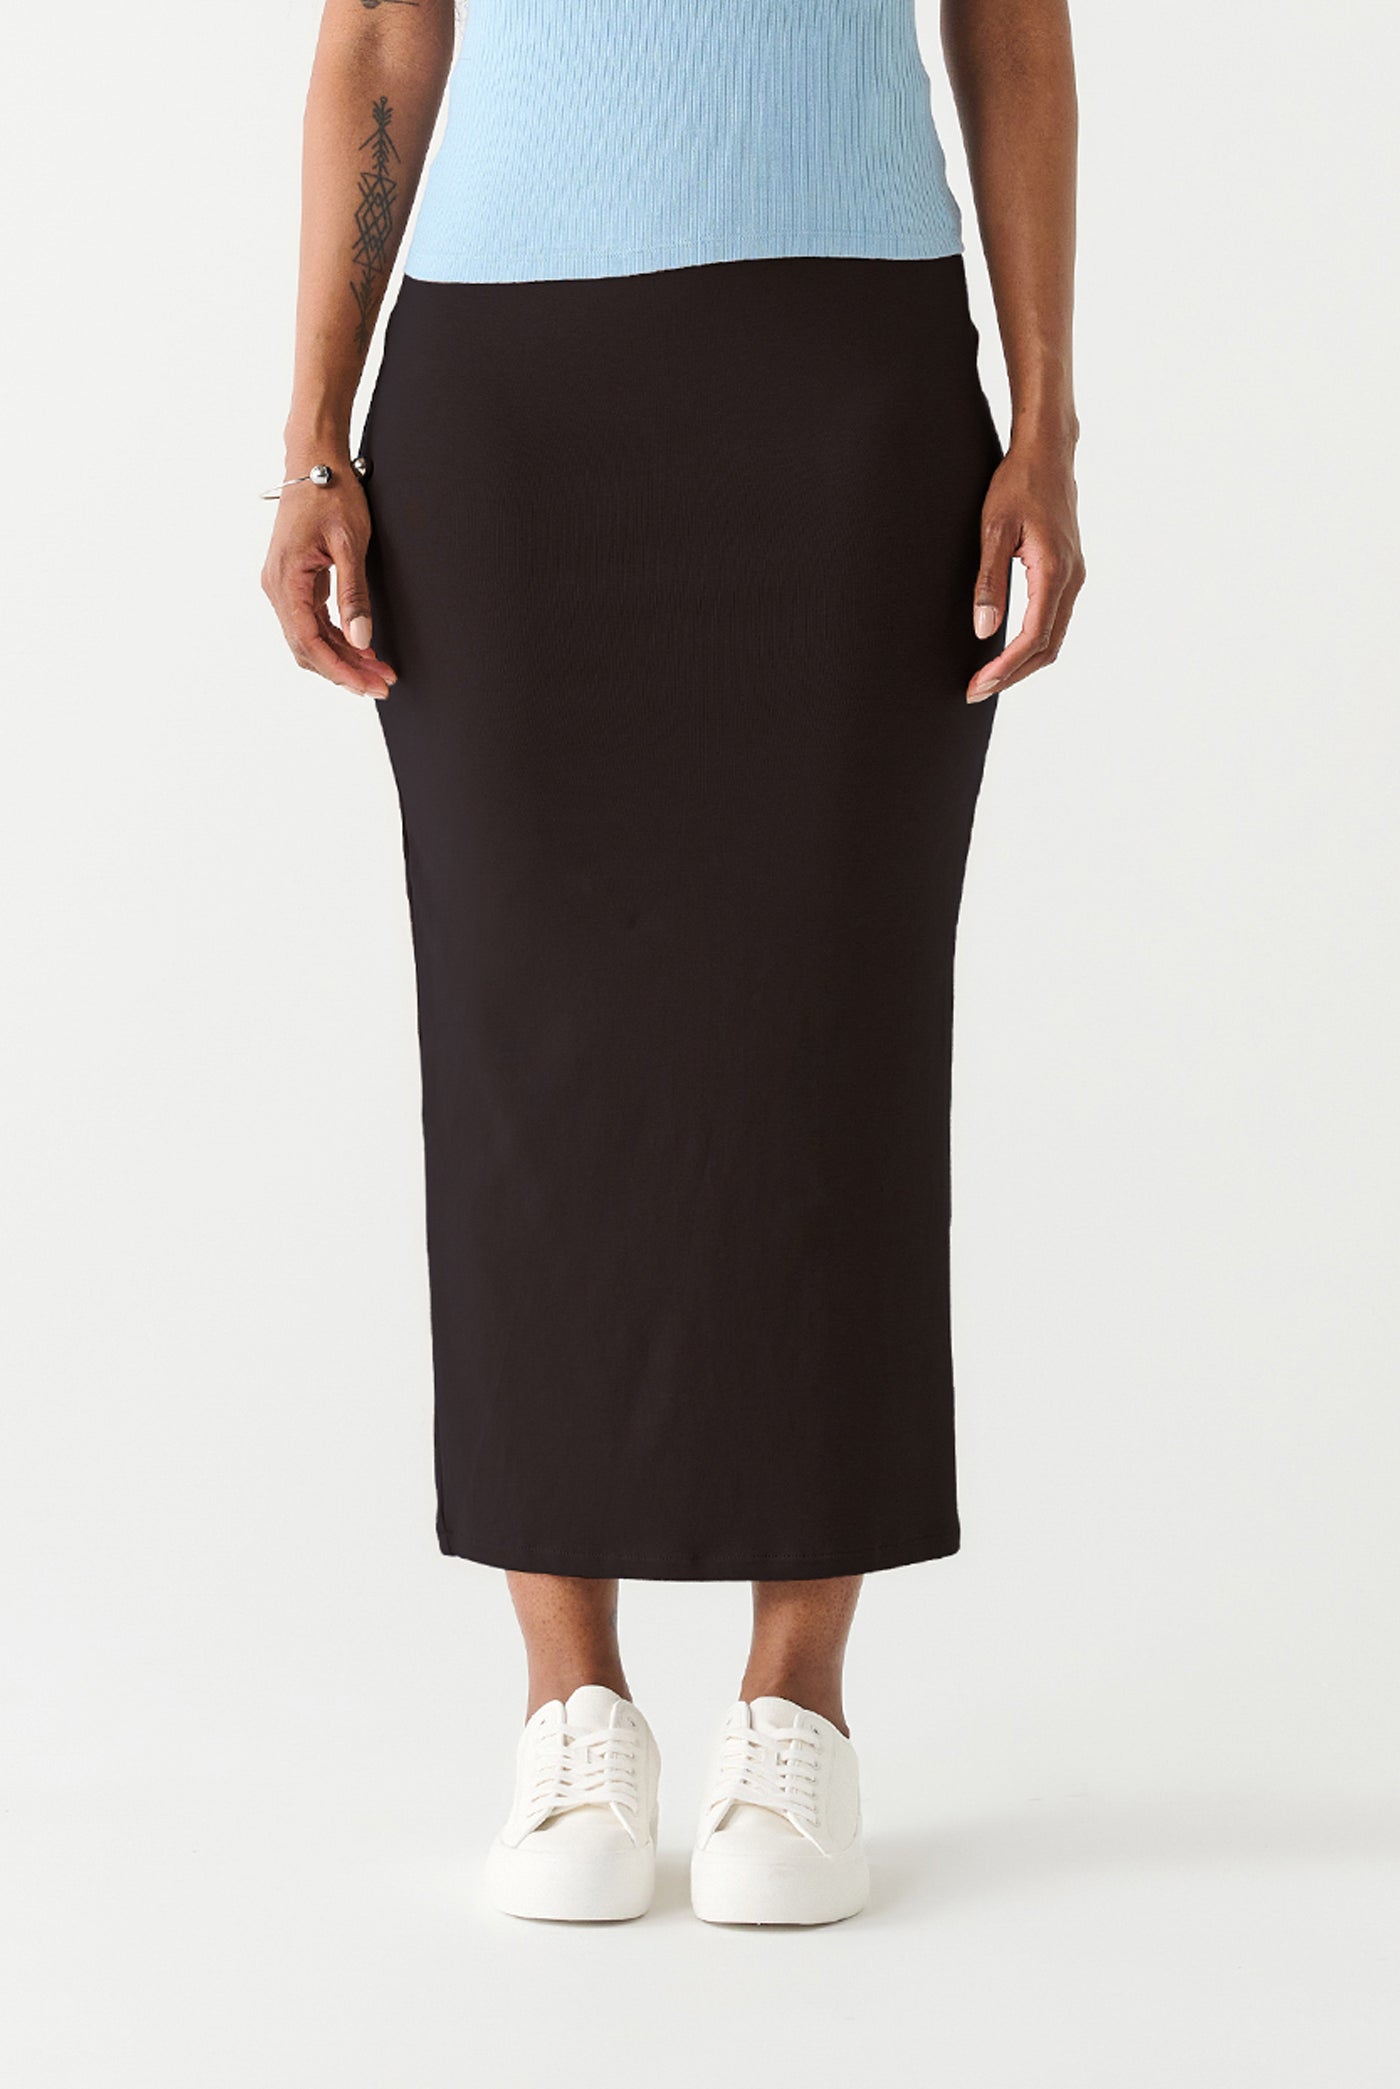 Zoe Knit Maxi Skirt-Skirts-Vixen Collection, Day Spa and Women's Boutique Located in Seattle, Washington